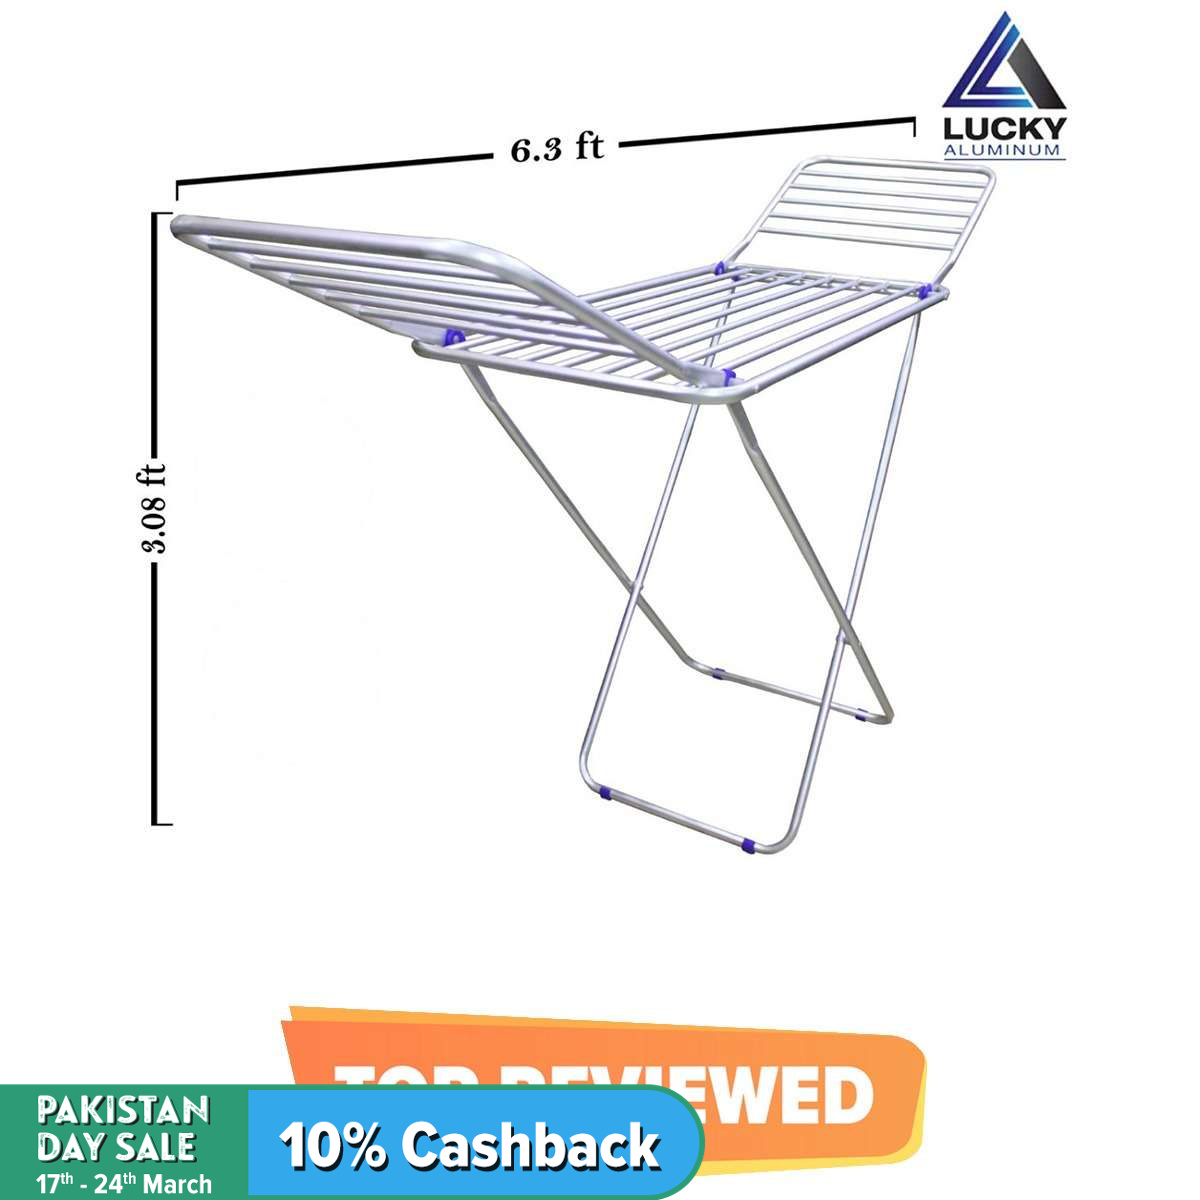 Aluminium Rust Proof Folding Cloth Dryer Stand 6.3 Feet Length - Weather Resistant Long Lasting Light Weight